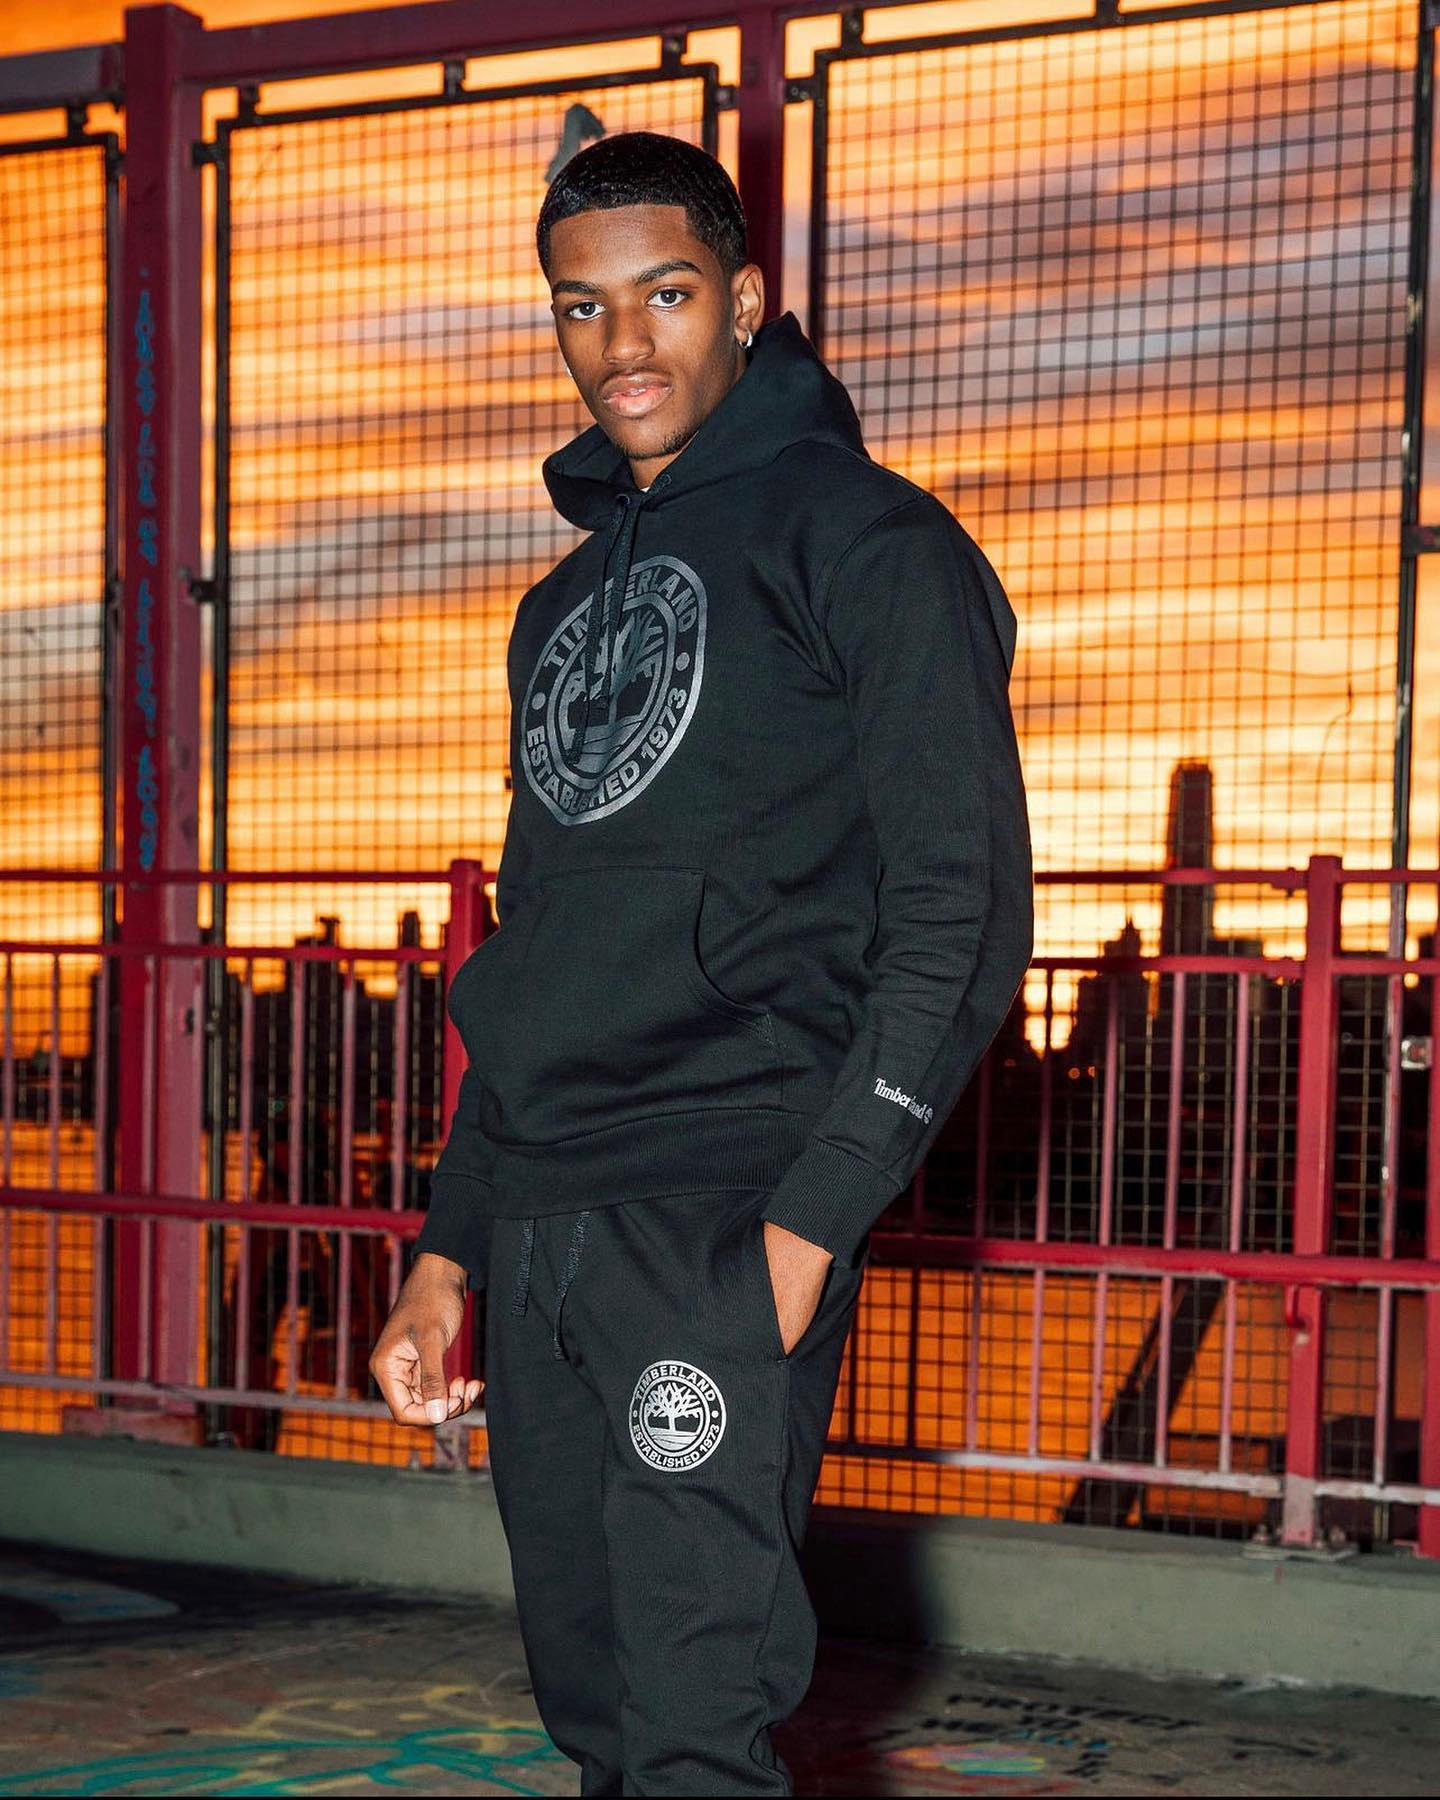 Layton Lamell - Me for #timberland X #dtlrofficial in the Exclusive 'Black Reflective' Premium 6-Inc